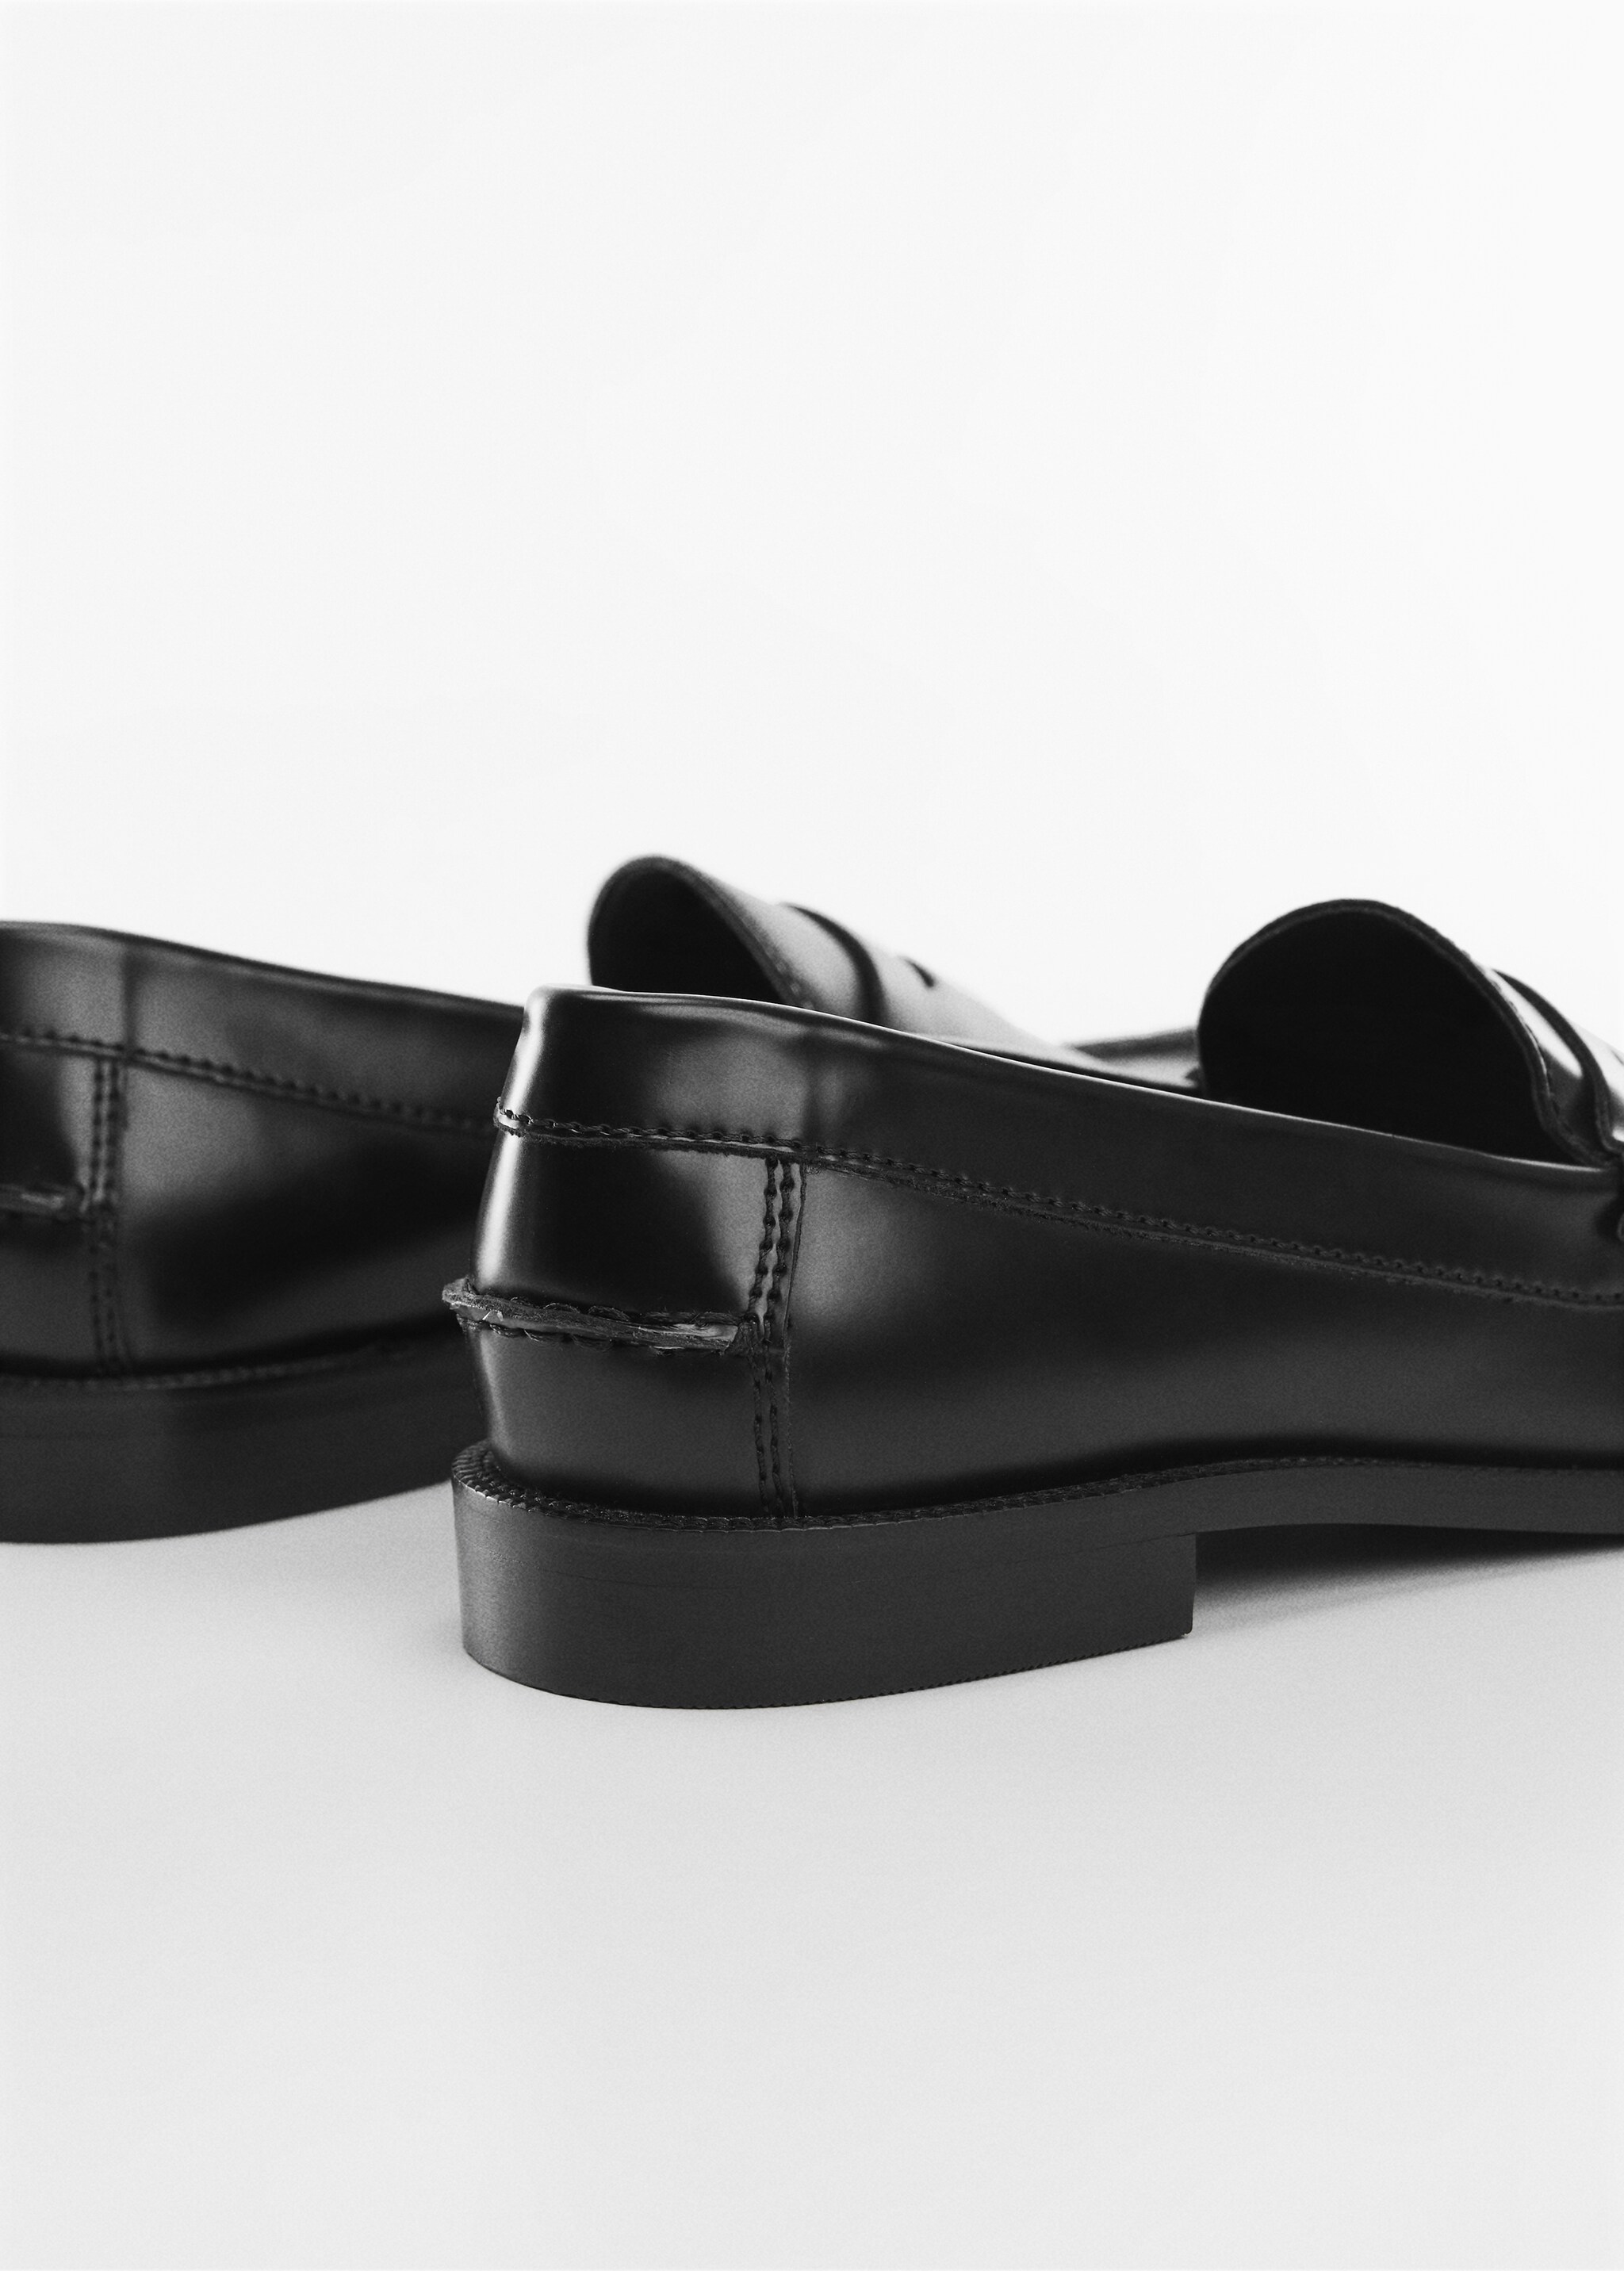 Classic loafers - Details of the article 1